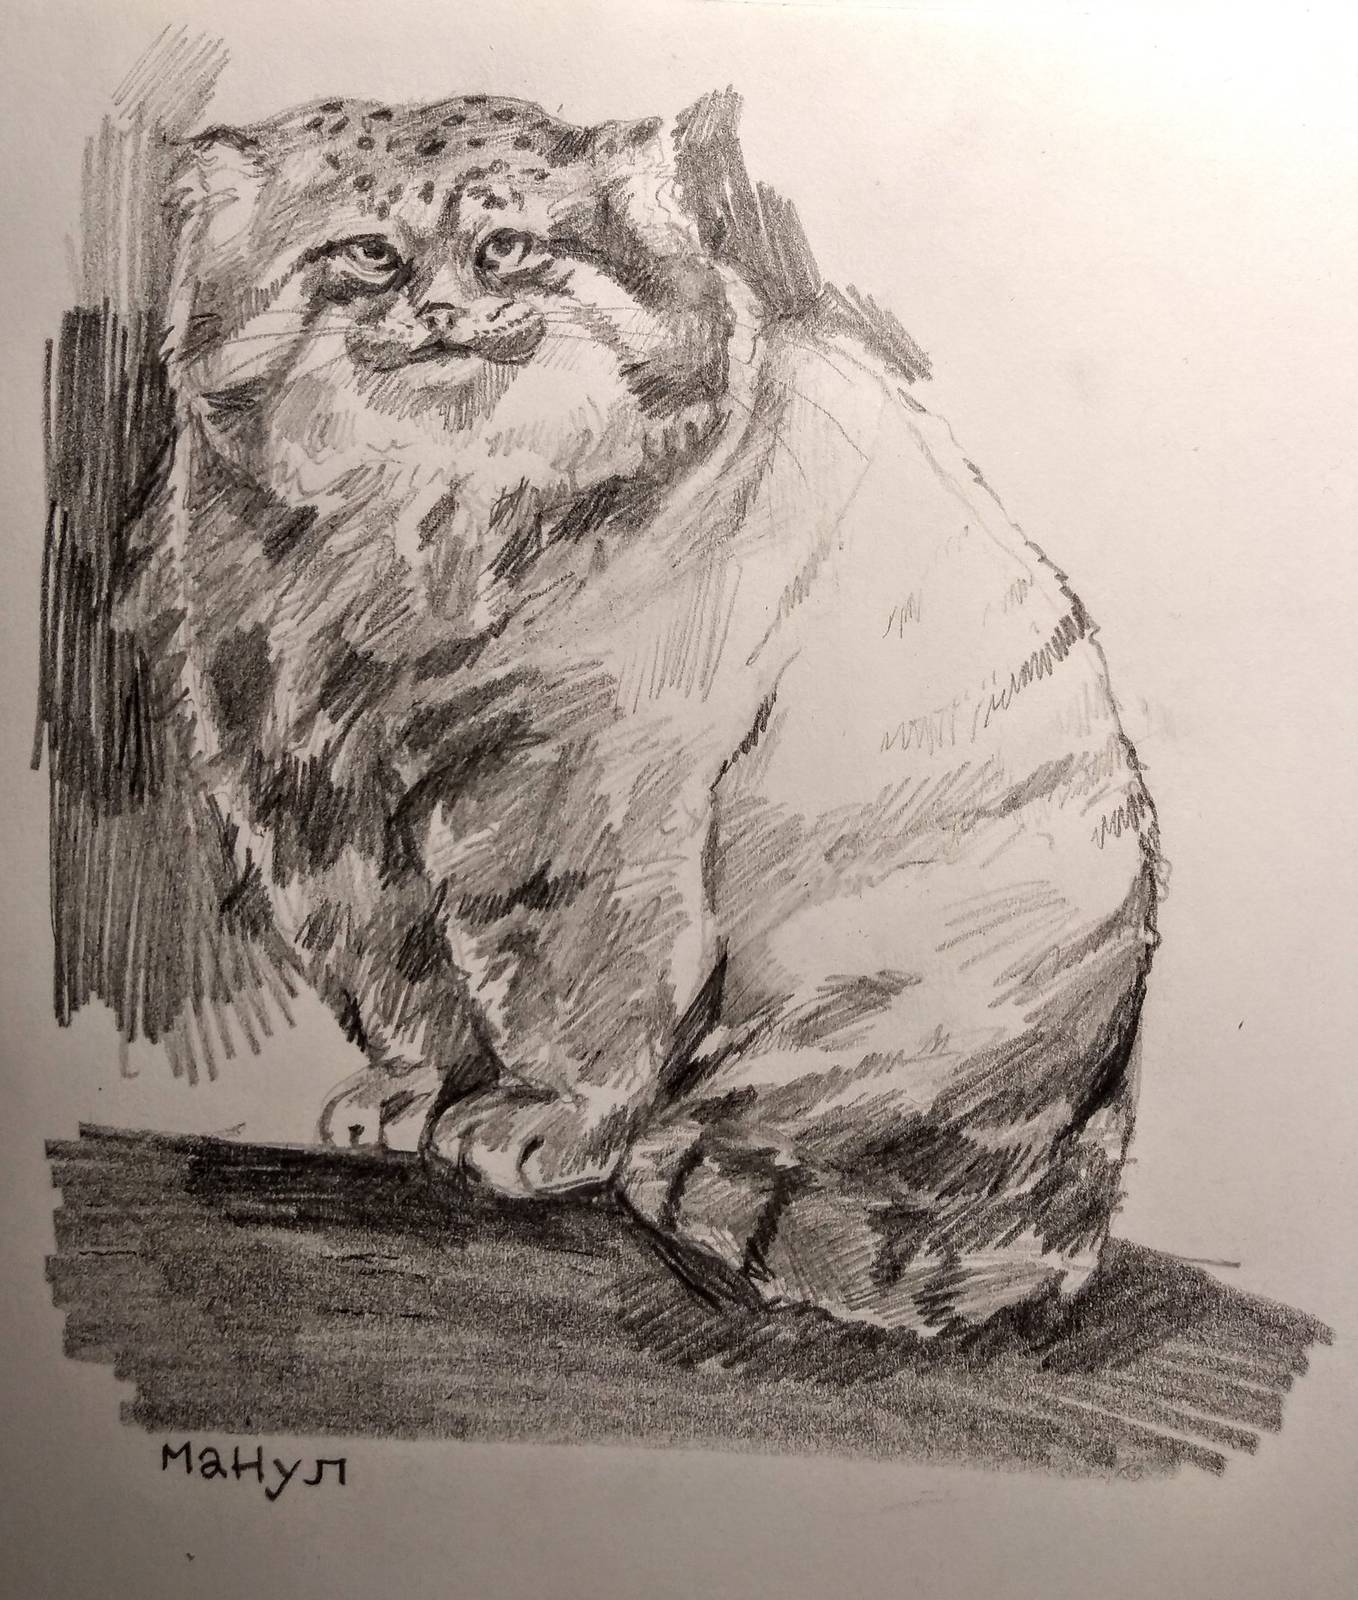 Pencil drawing of a polite looking manul.